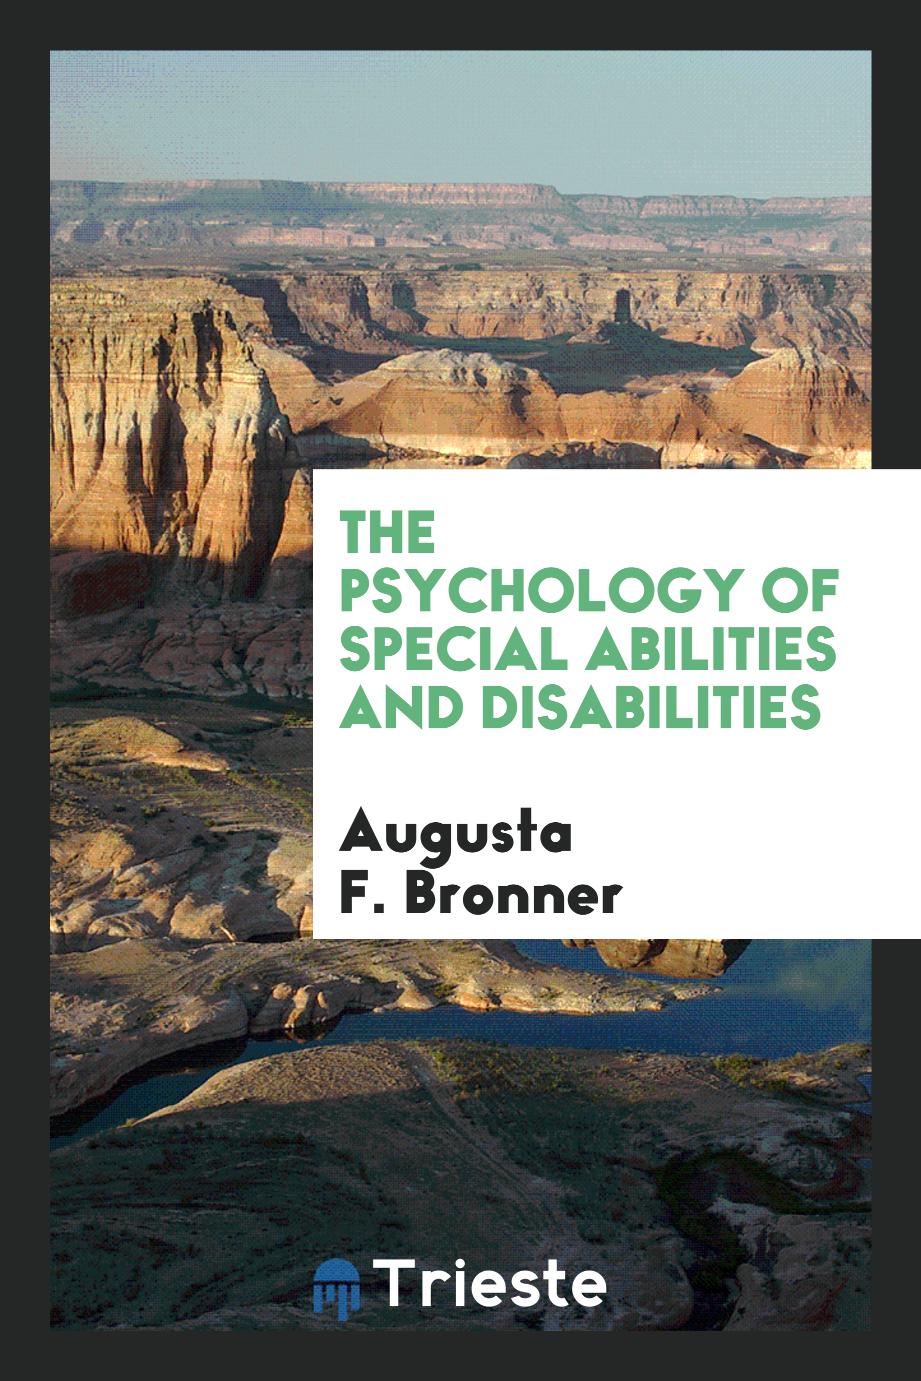 The psychology of special abilities and disabilities